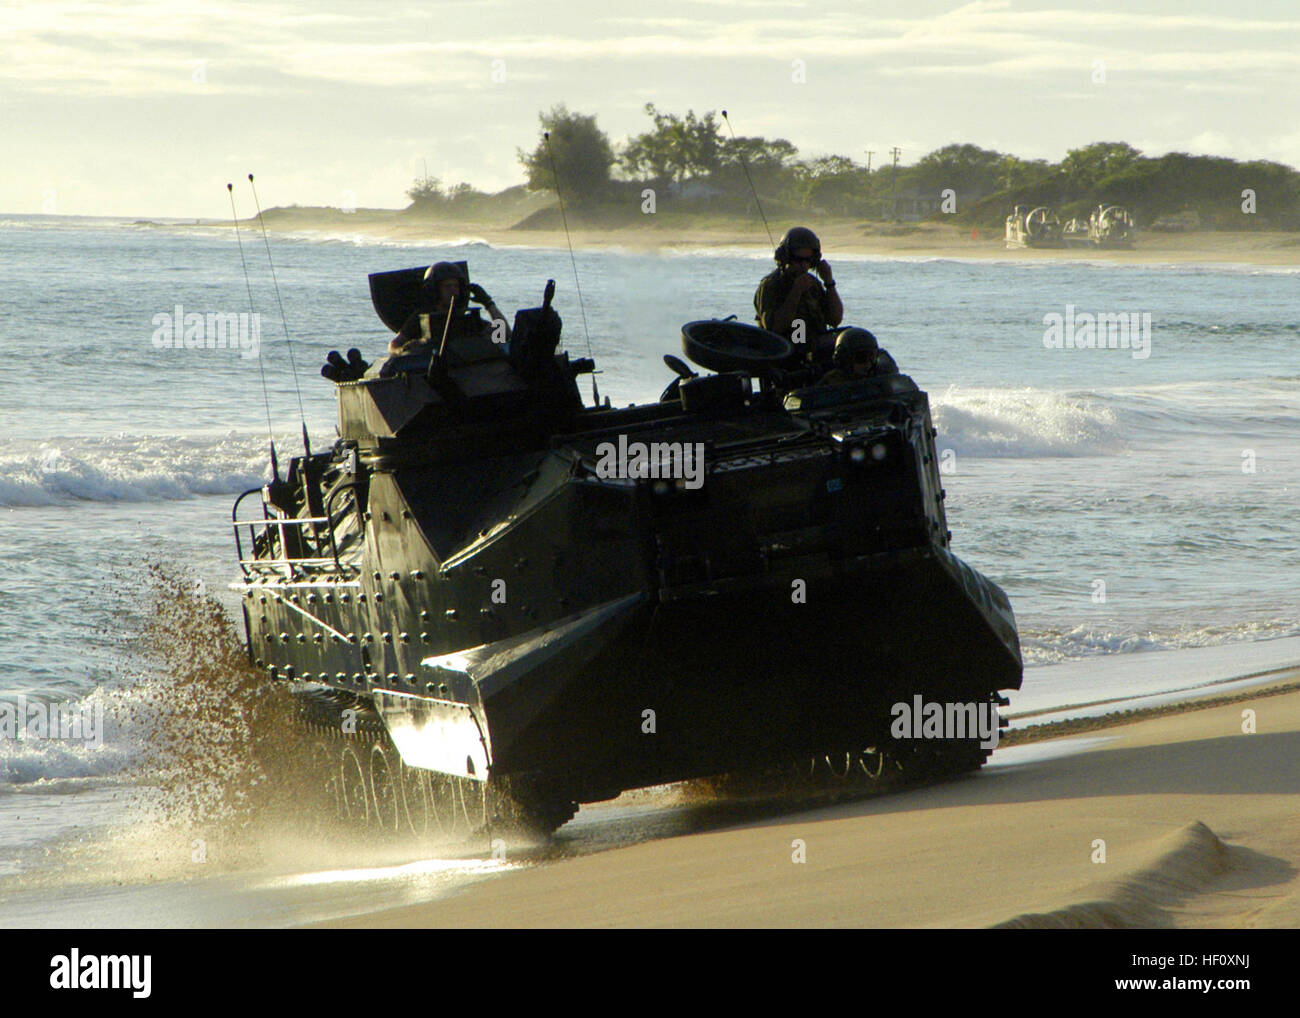 050628-N-1397H-144 Kauai, Hawaii (June 28, 2005) - Marines assigned to the 3rd Amphibious Assault Battalion based out of Camp Pendleton, Calif., maneuver their Amphibious Assault Vehicles (AAVs) around the beach during a training exercise at the Pacific Missile Range Facility. U.S. Navy Photo by PhotographerÕs Mate 2nd Class Prince A. Hughes III (RELEASED) AAV-7A1 comes ashore Stock Photo